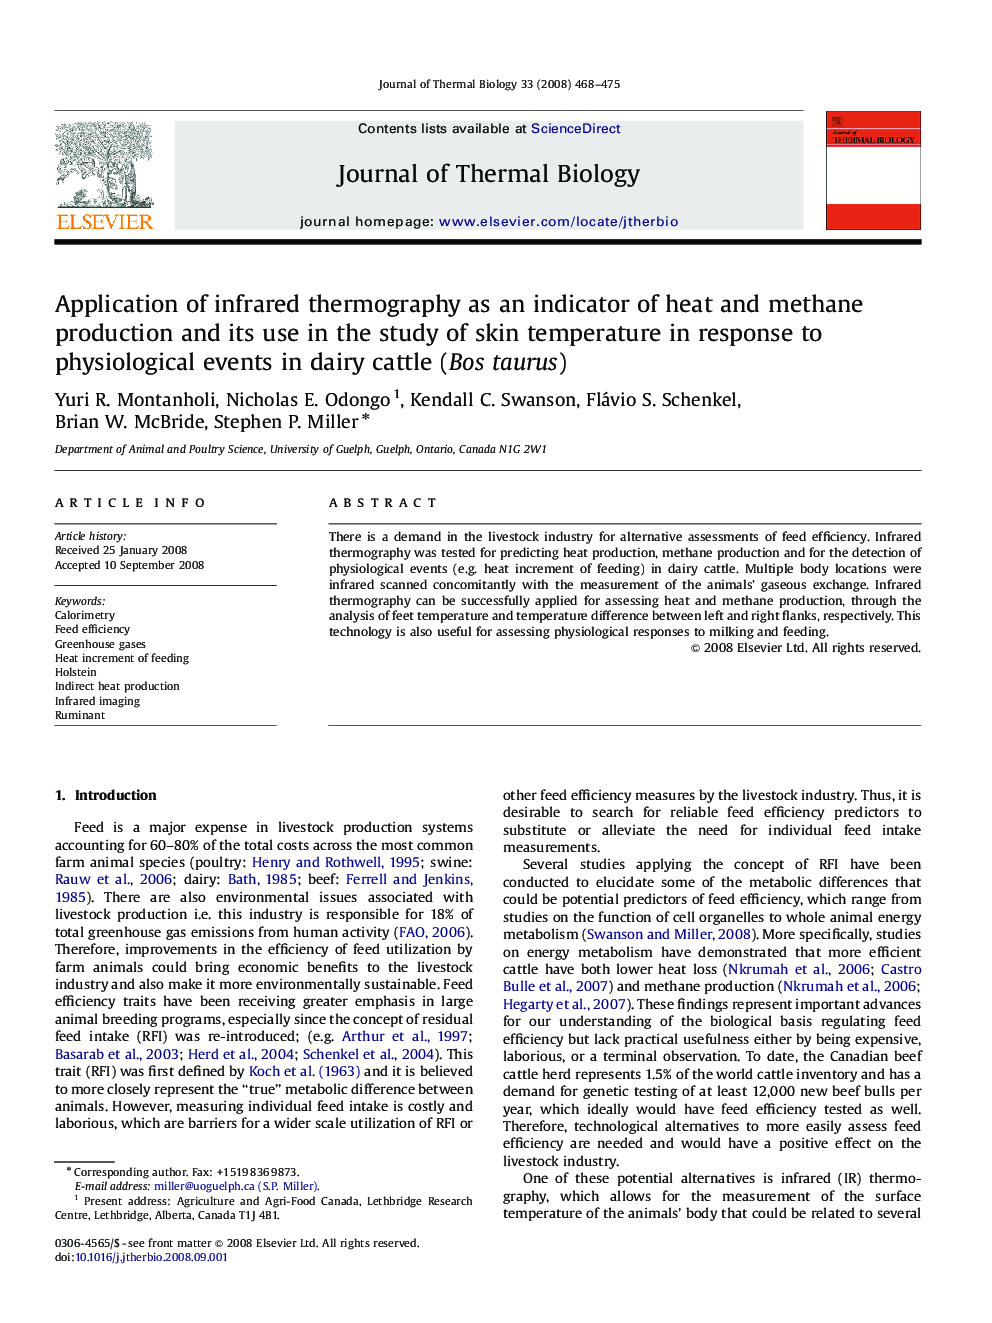 Application of infrared thermography as an indicator of heat and methane production and its use in the study of skin temperature in response to physiological events in dairy cattle (Bos taurus)